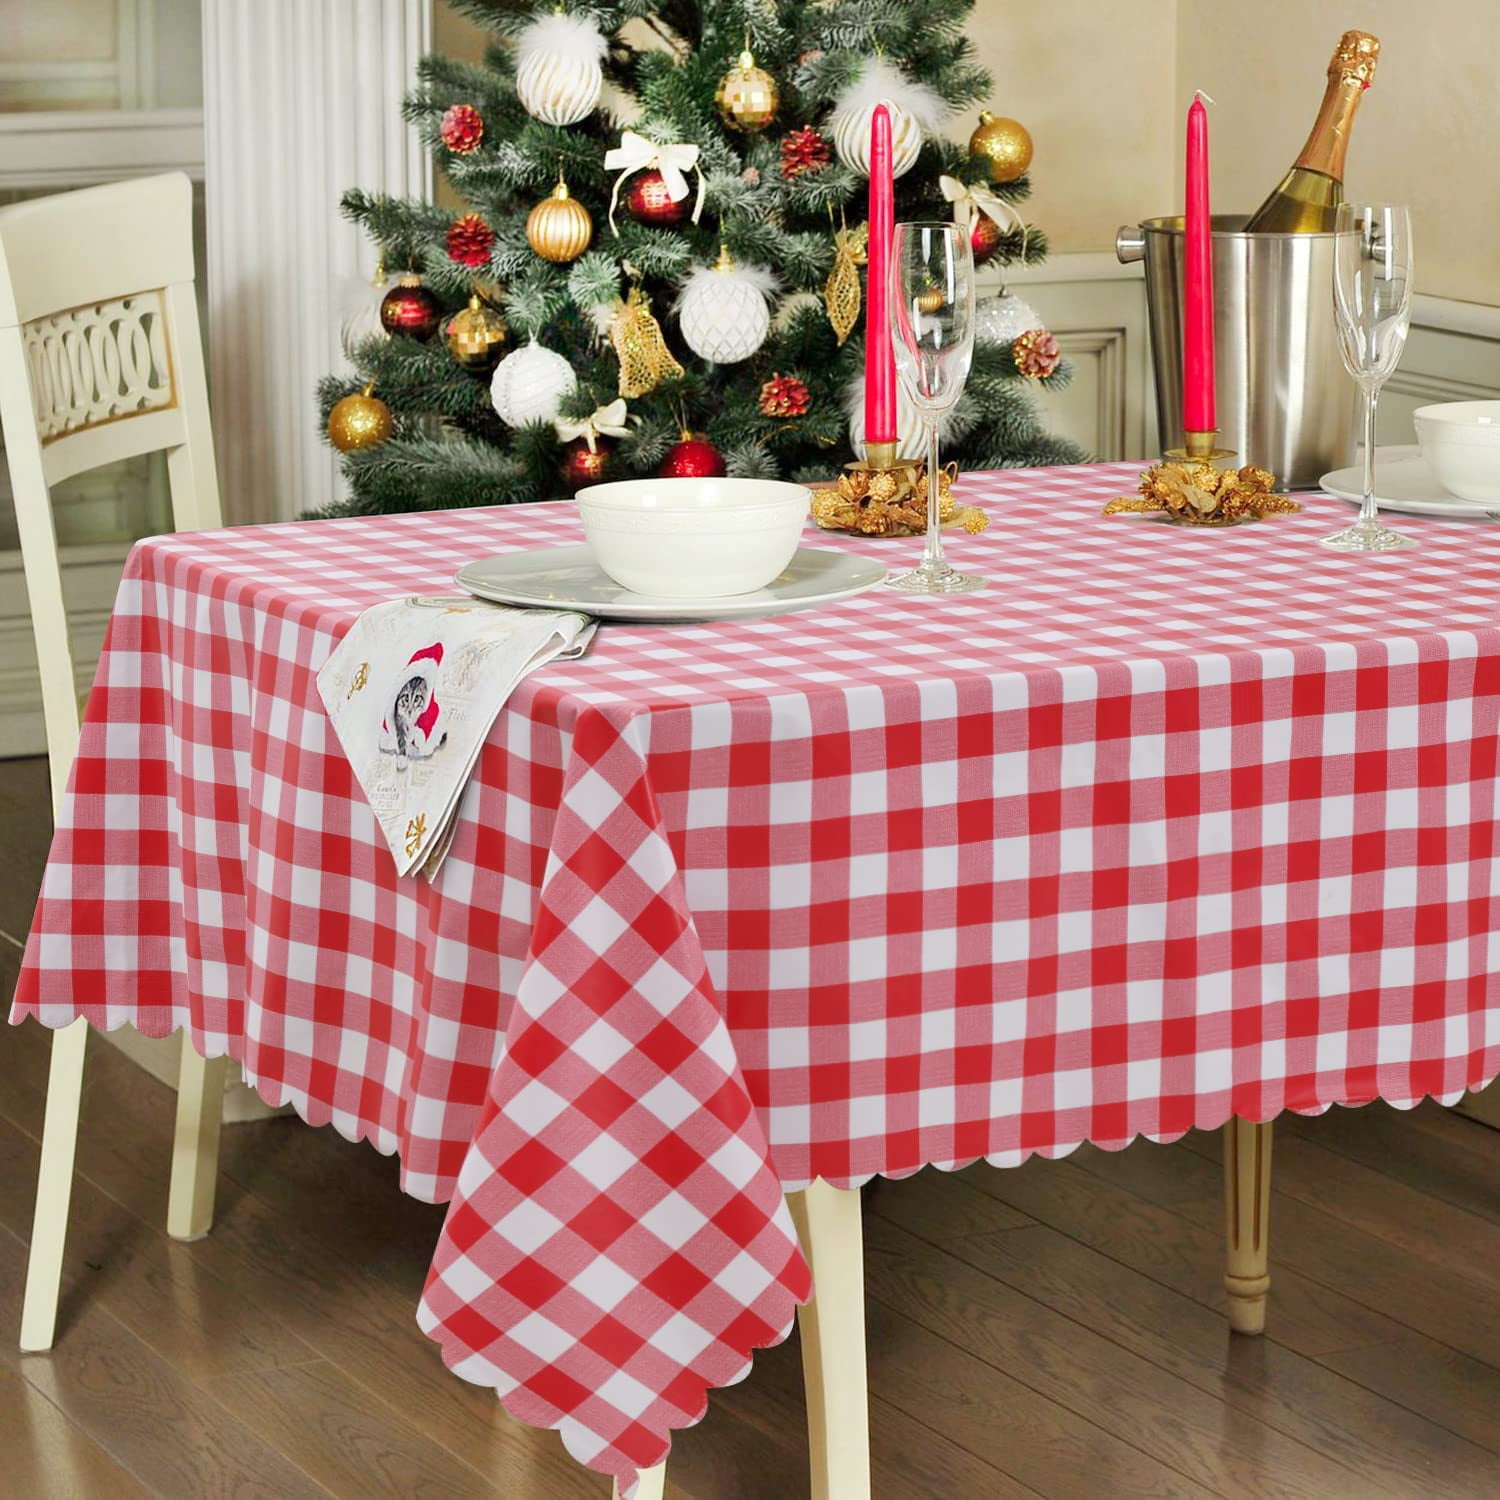 Tablecloths 54 x 72 Inch Waterproof Stain Resistant Checkerboard Polyester Rectangular Table Cover for Outdoor Picnic Kitchen Dining